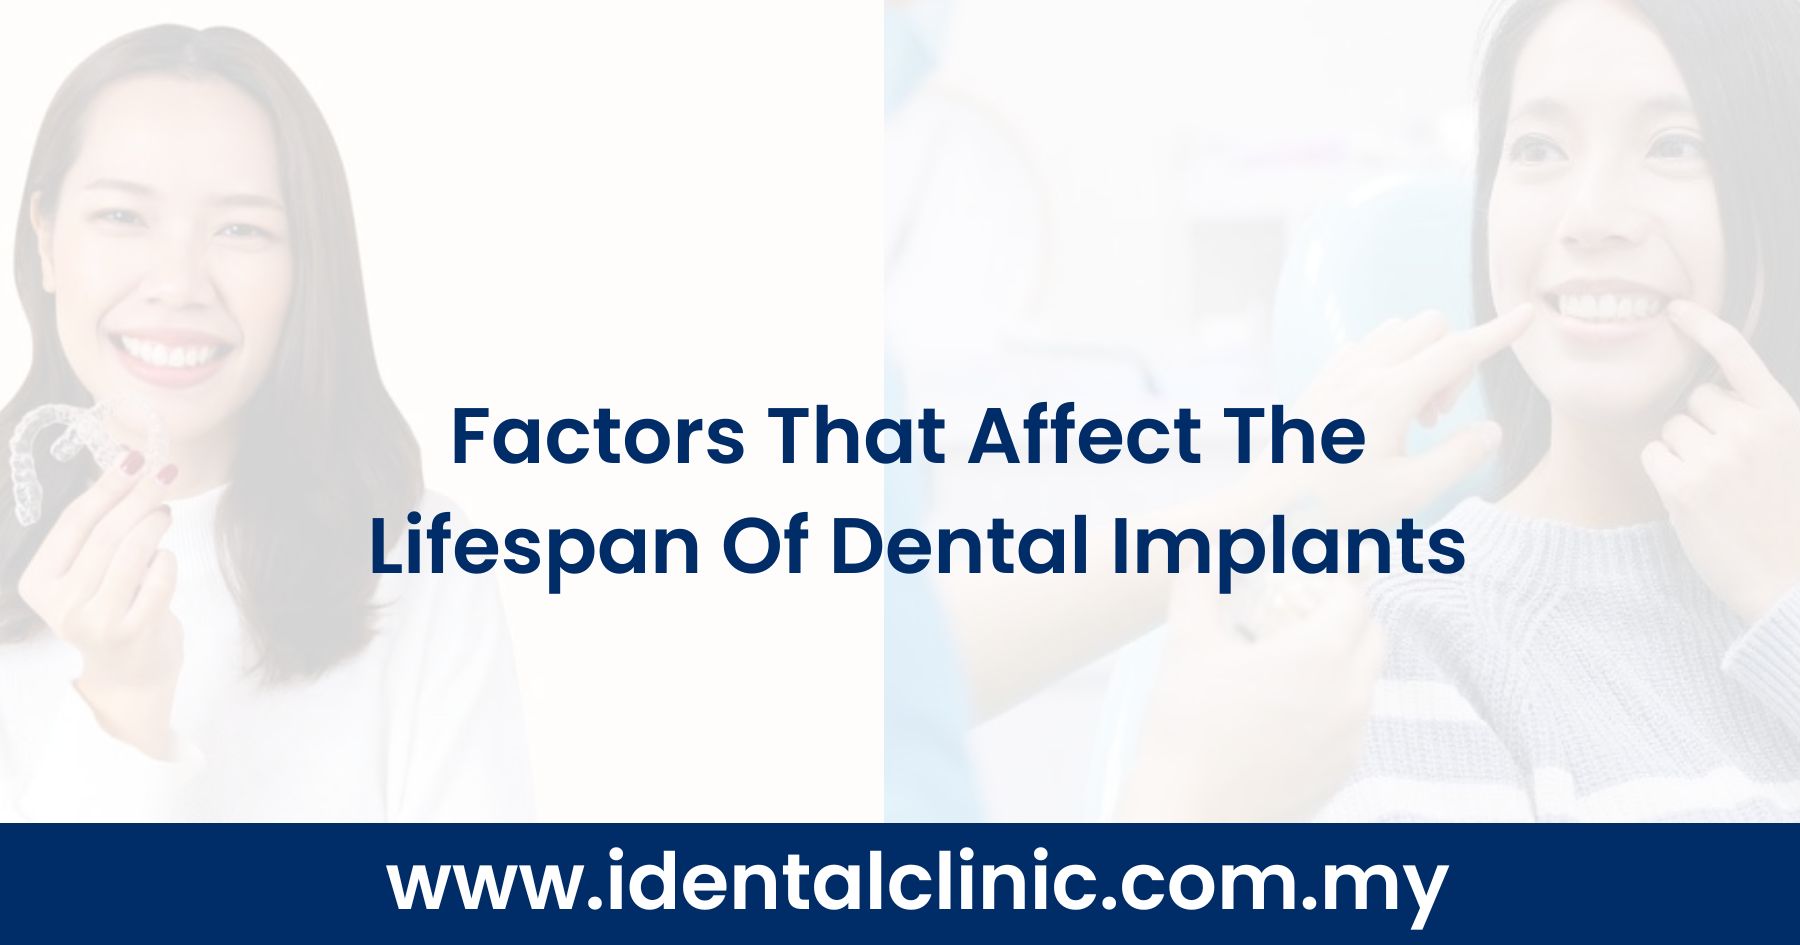 Factors That Affect The Lifespan Of Dental Implants